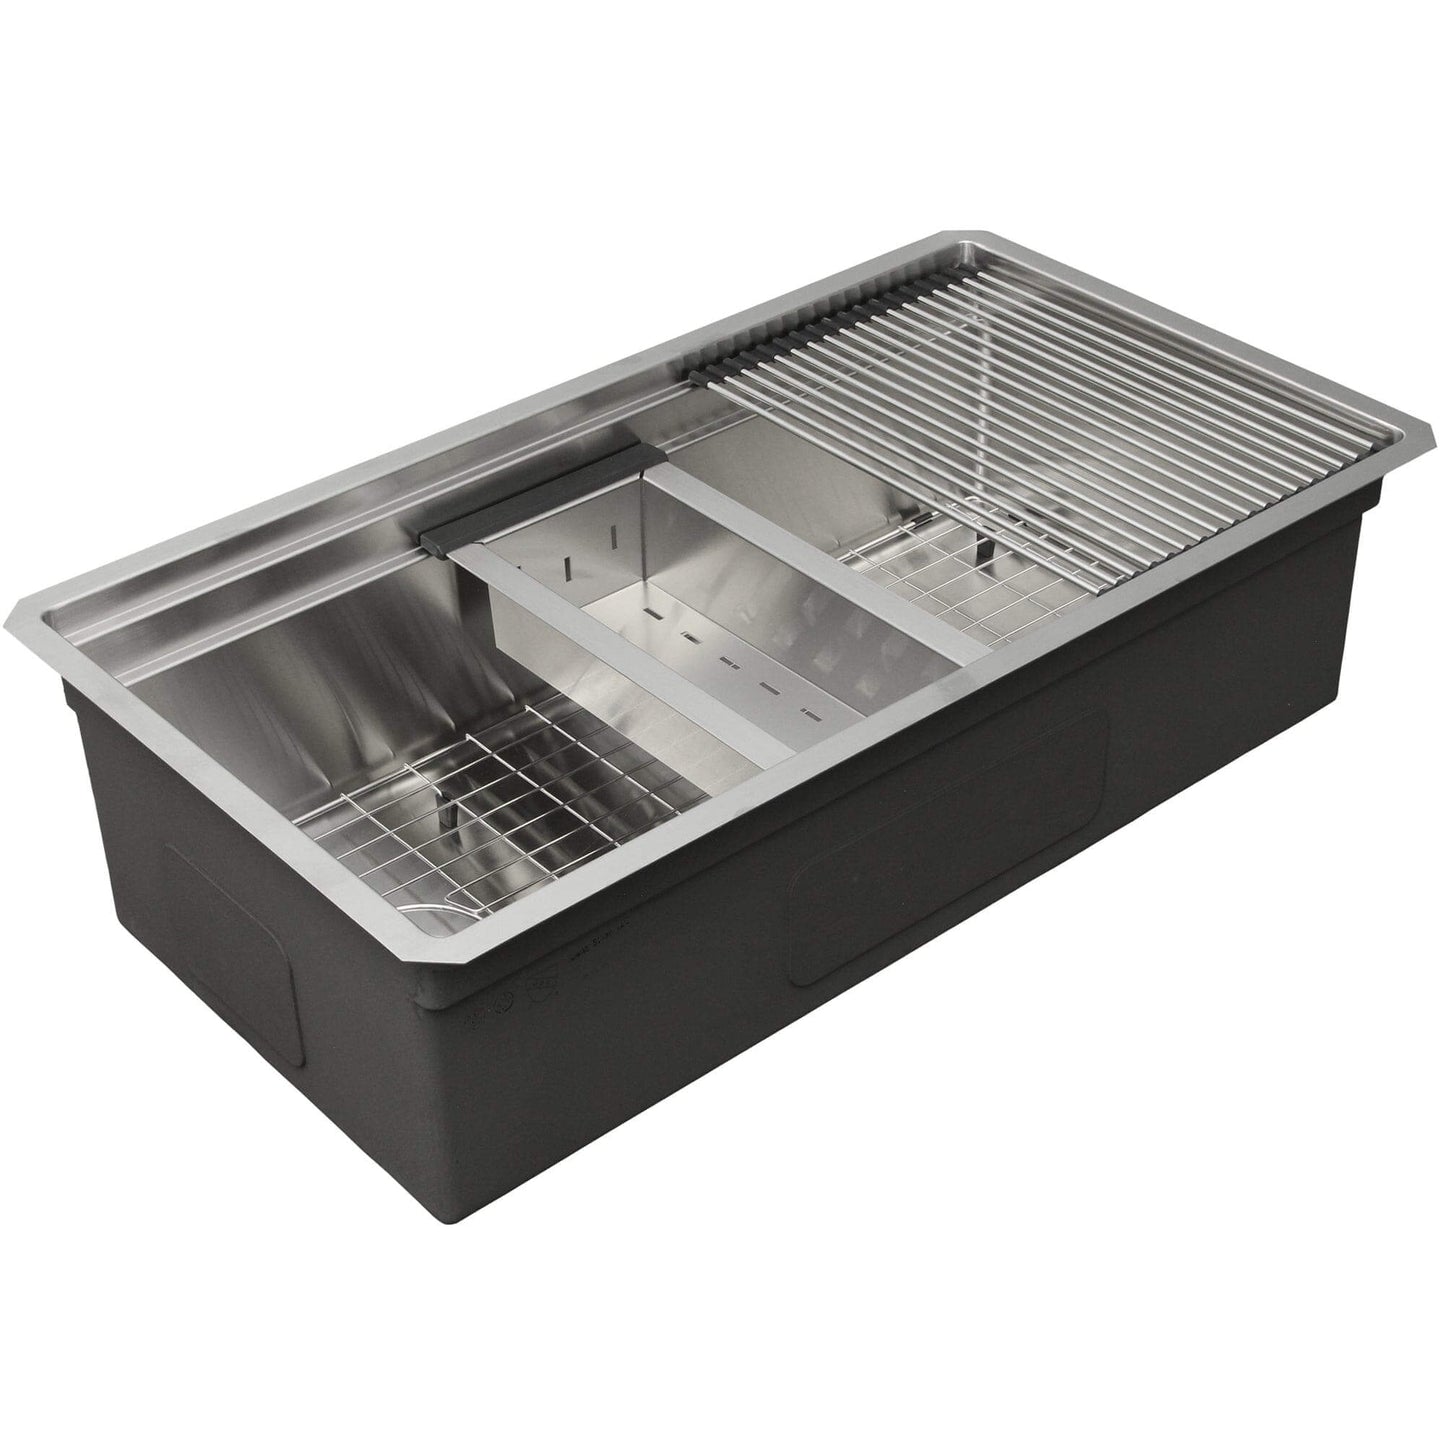 Nantucket 32" Small Radius Pro Series Prep Station Single Bowl Undermount Stainless Steel Kitchen Sink with Compatible Accessories - SR-PS-3220-OSD